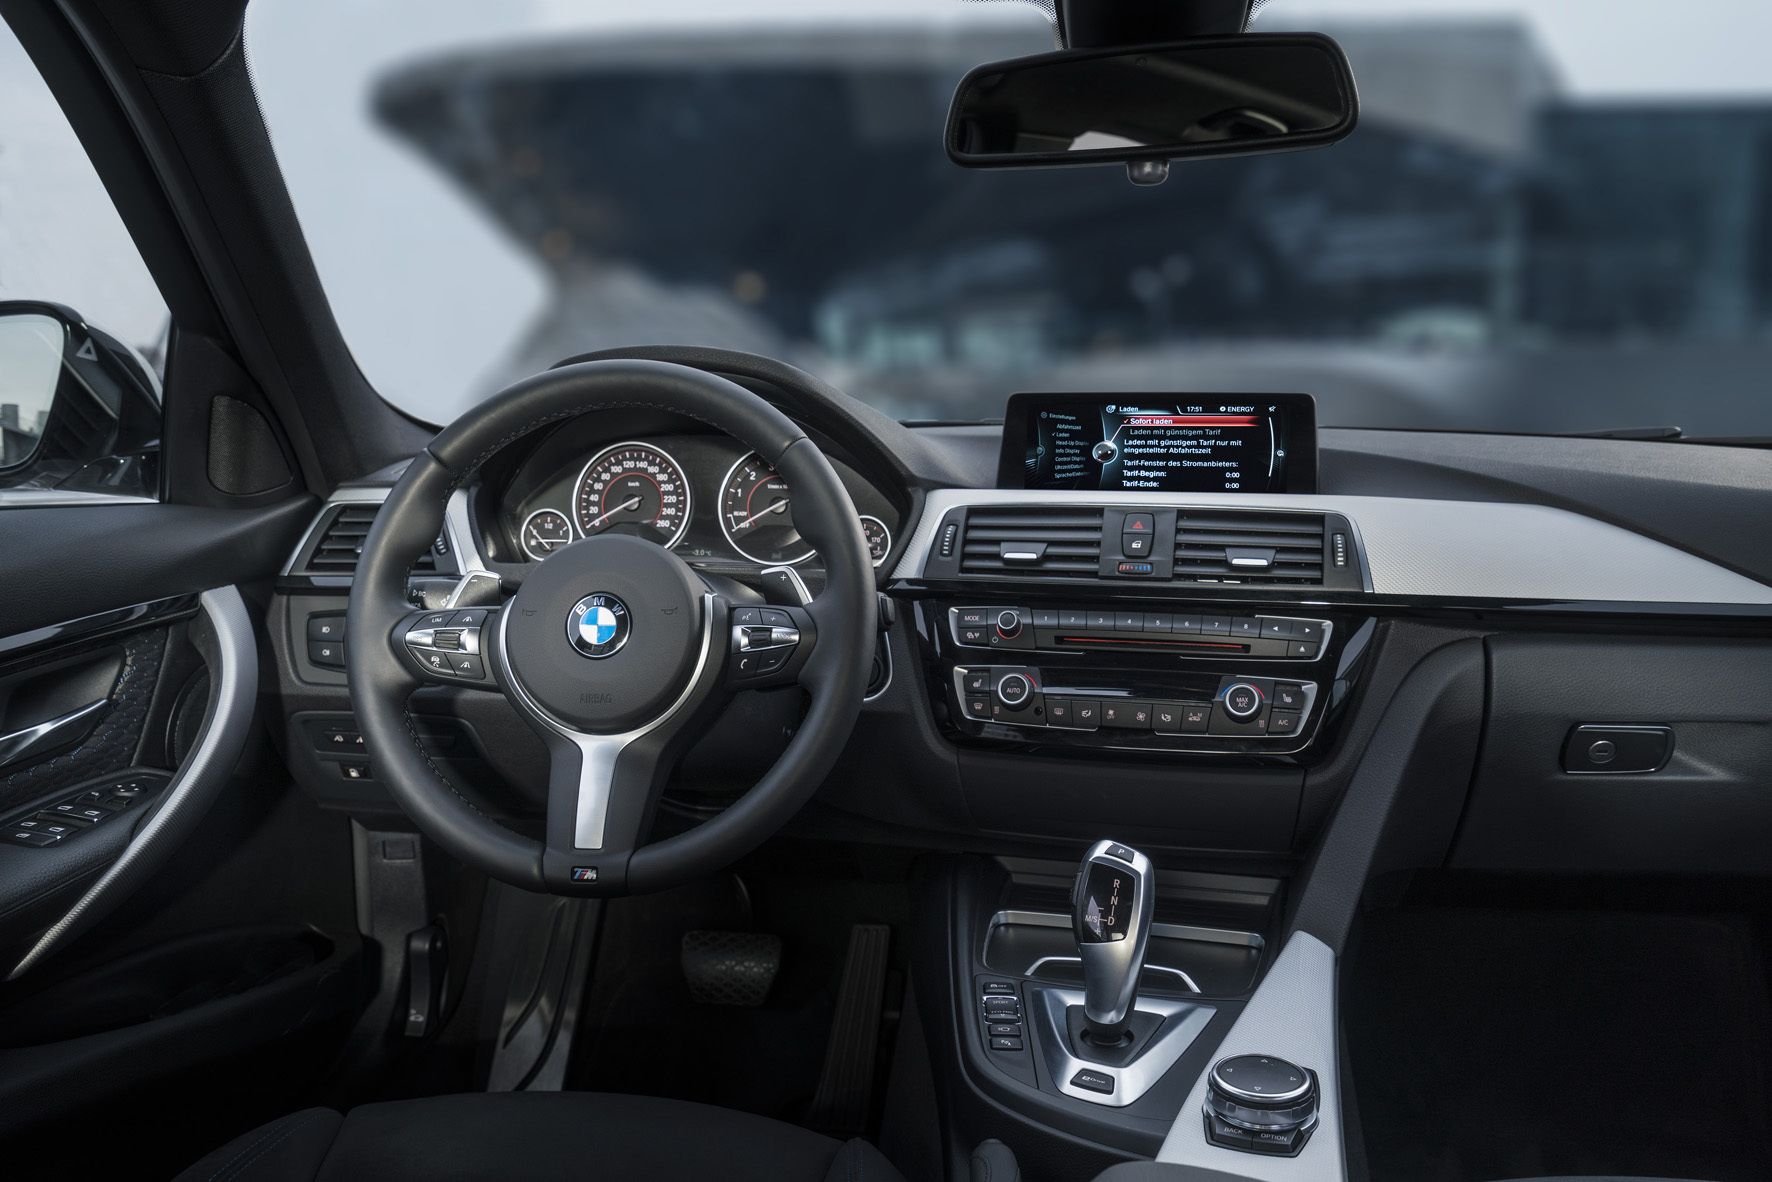 The interior of the BMW 330e is one of the few disappointments. At well over £30,000, the basic SE trim feels a bit underwhelming. A diesel in SE costs almost £10,000 less.